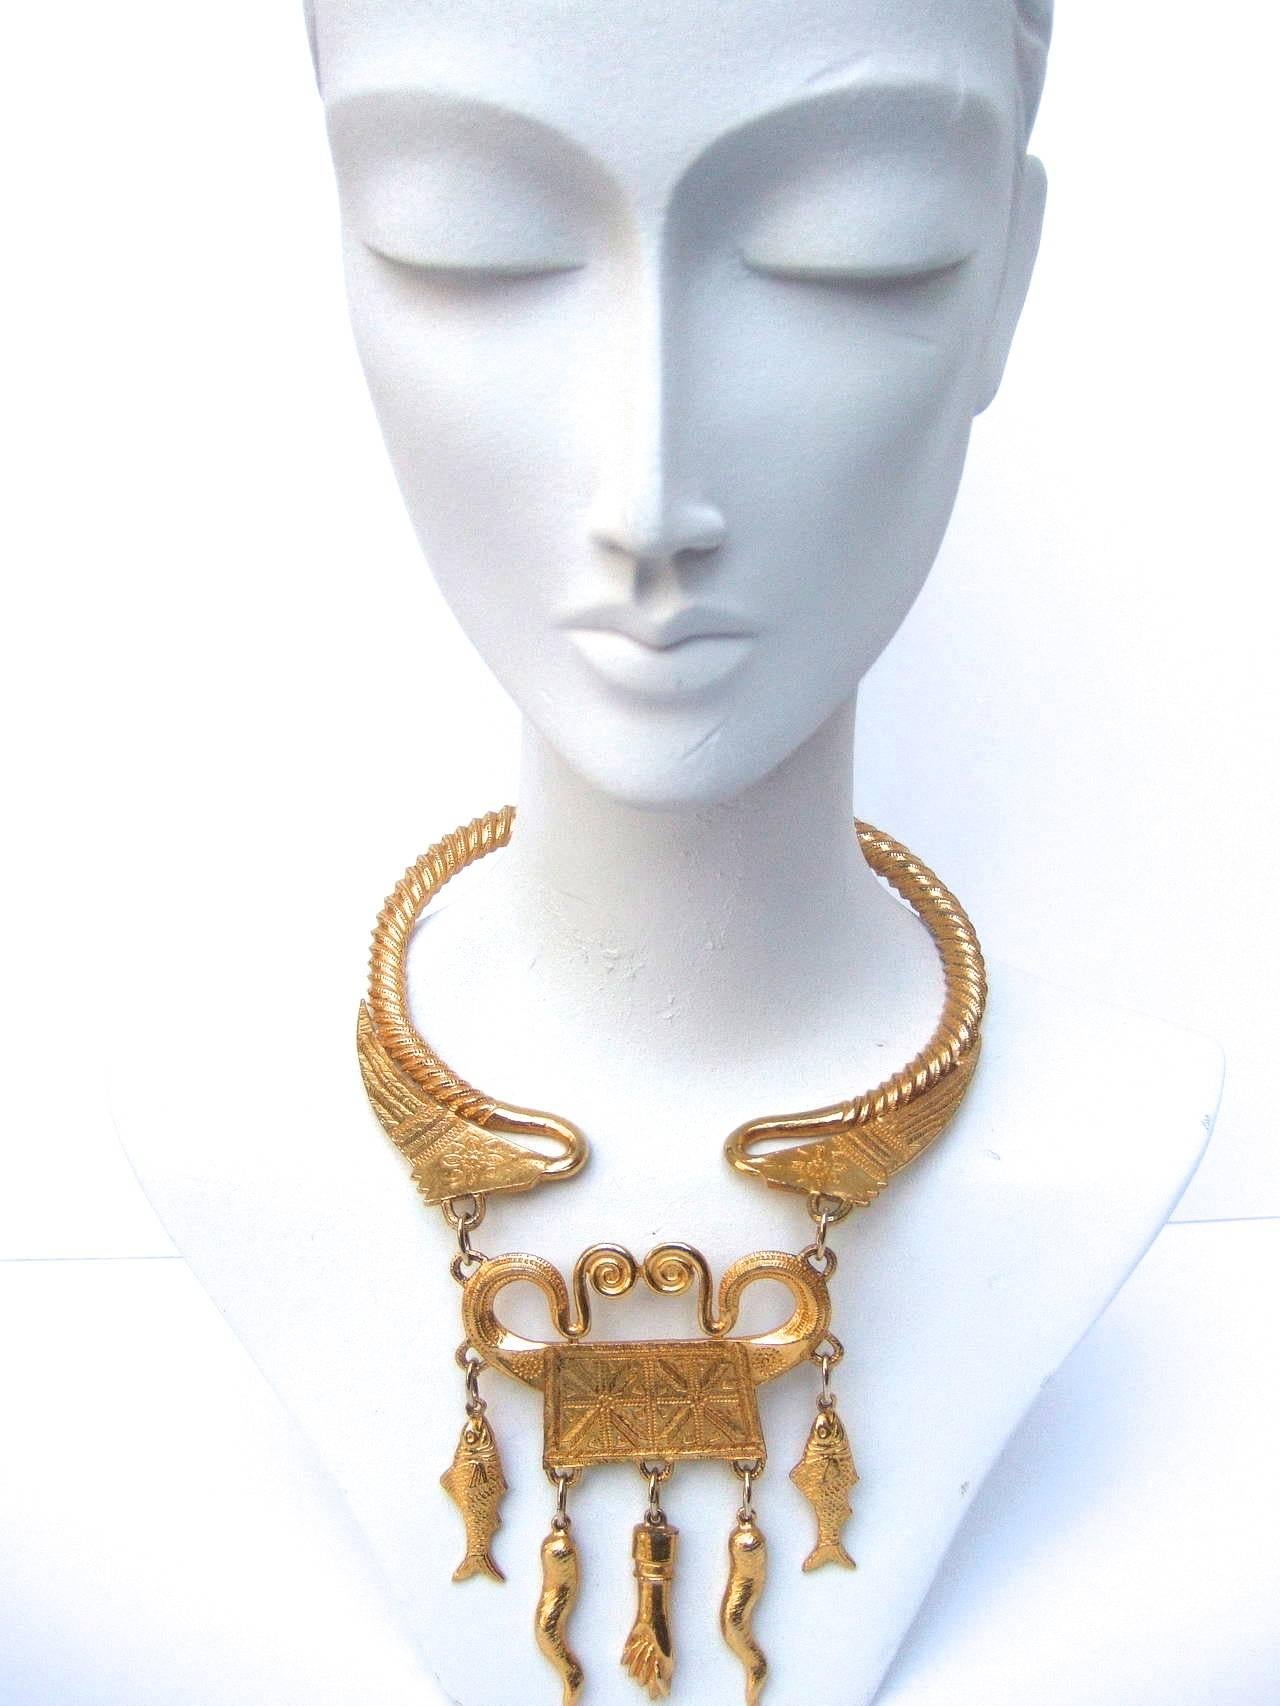 This exotic large scale necklace by Alexis Kirk is designed with dangling horns, fish, and hand embellishments suspended from a central plaque.

The gilded choker is made of chunky, very solid feeling, metal with grooved etchings.  The front edges